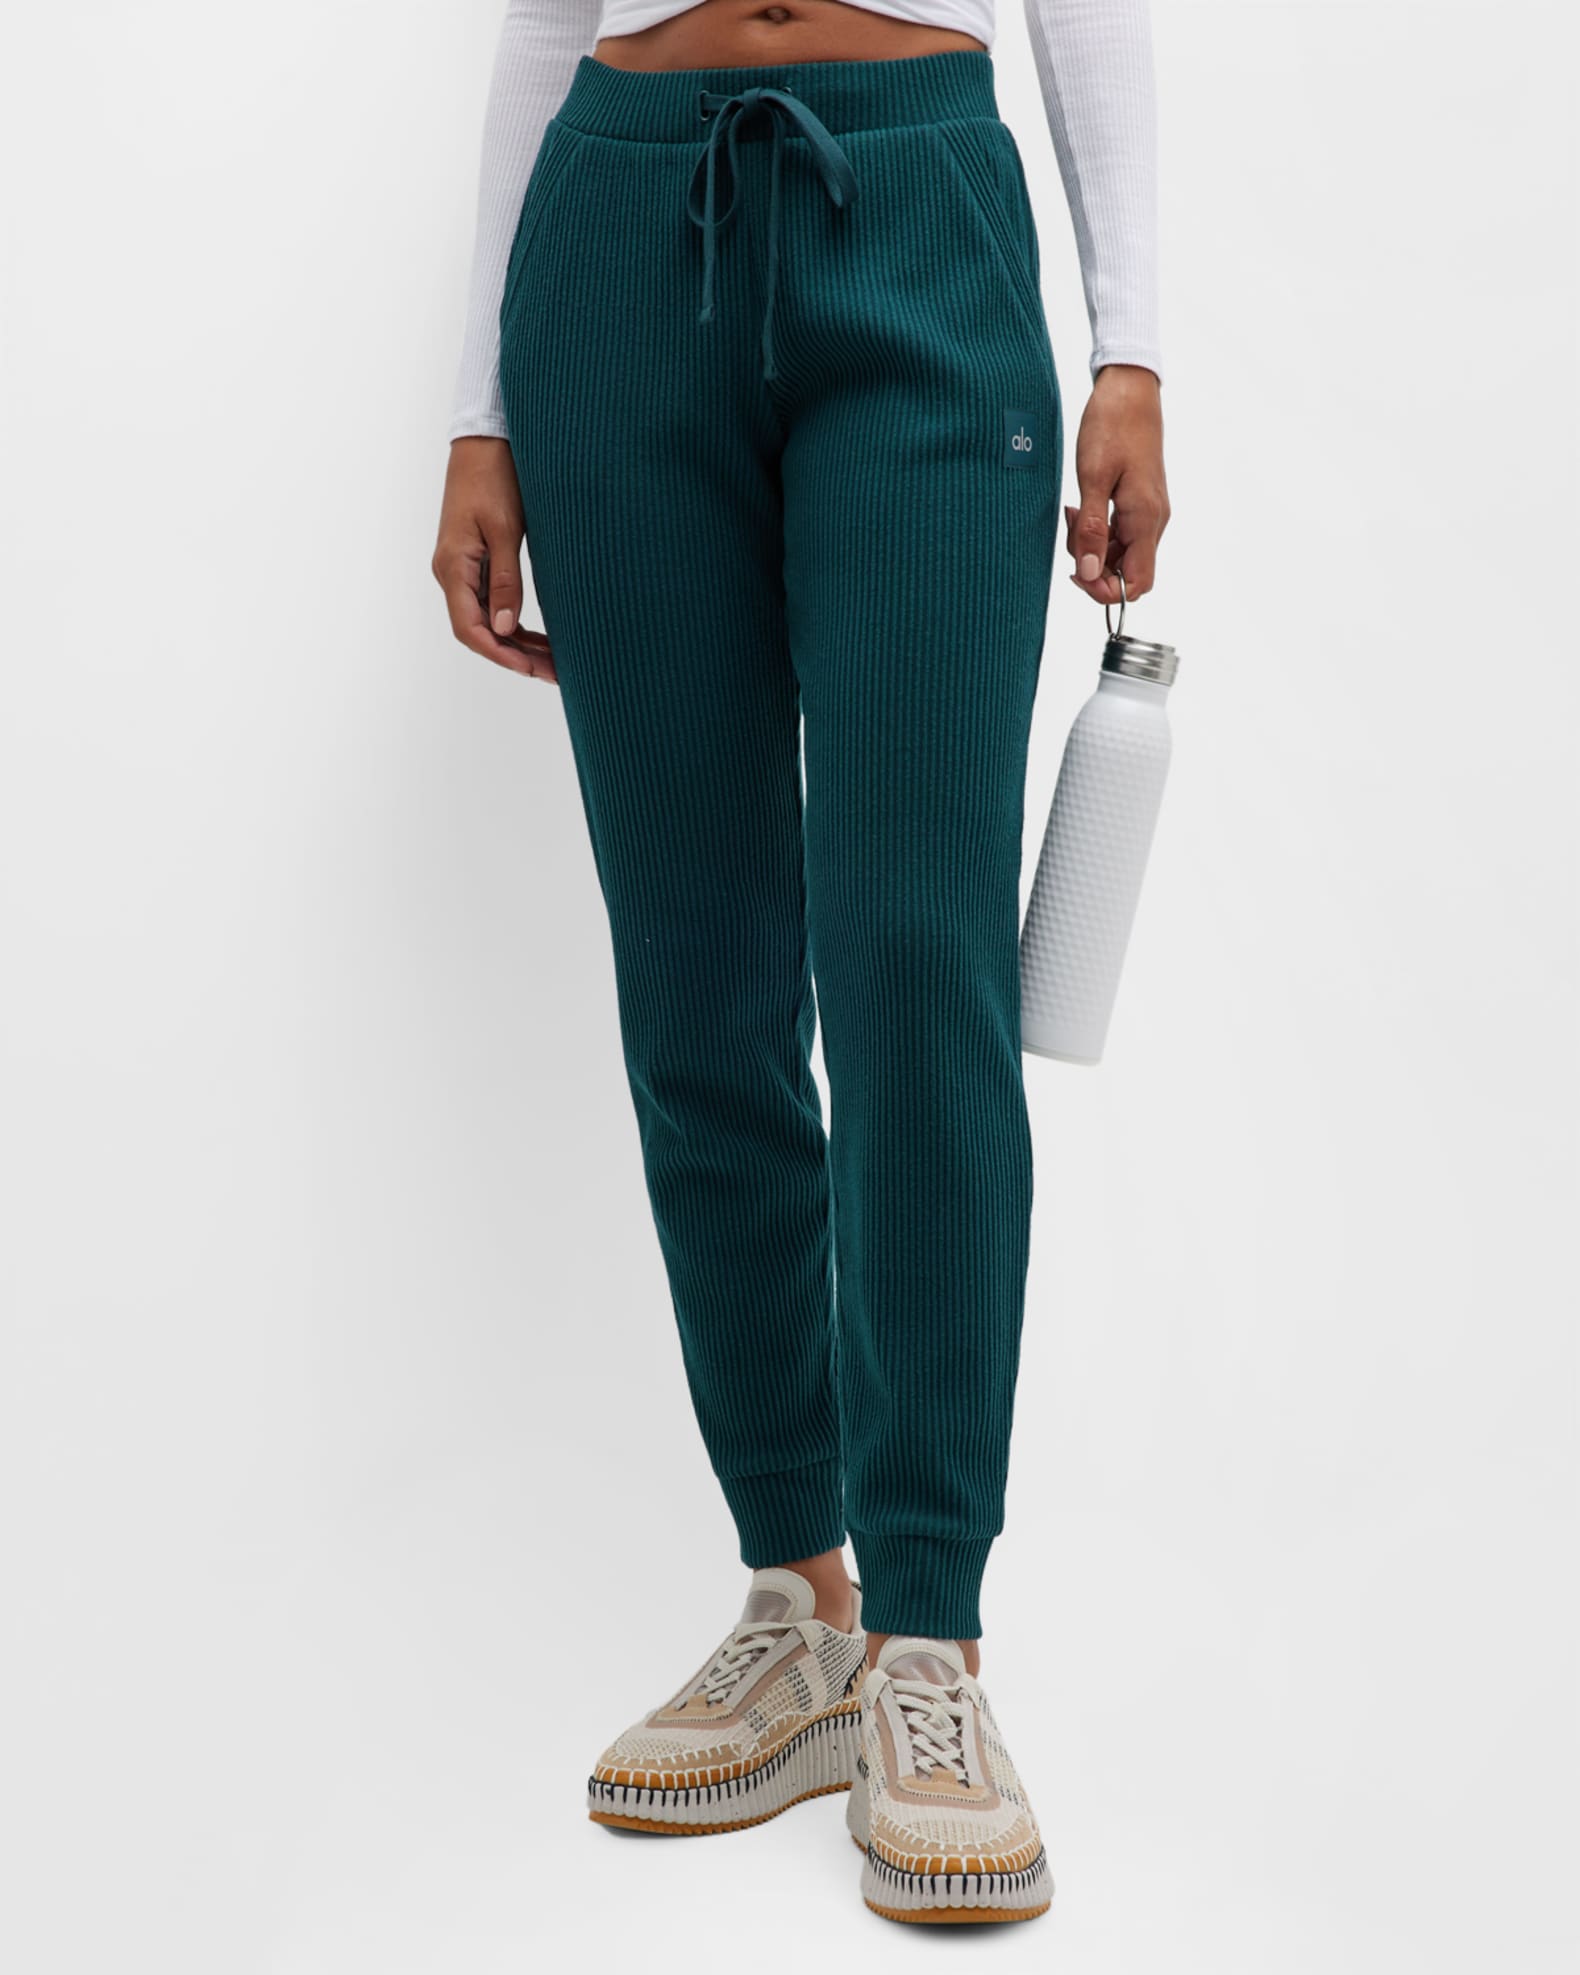 Muse Sweatpant in Steel Blue by Alo Yoga